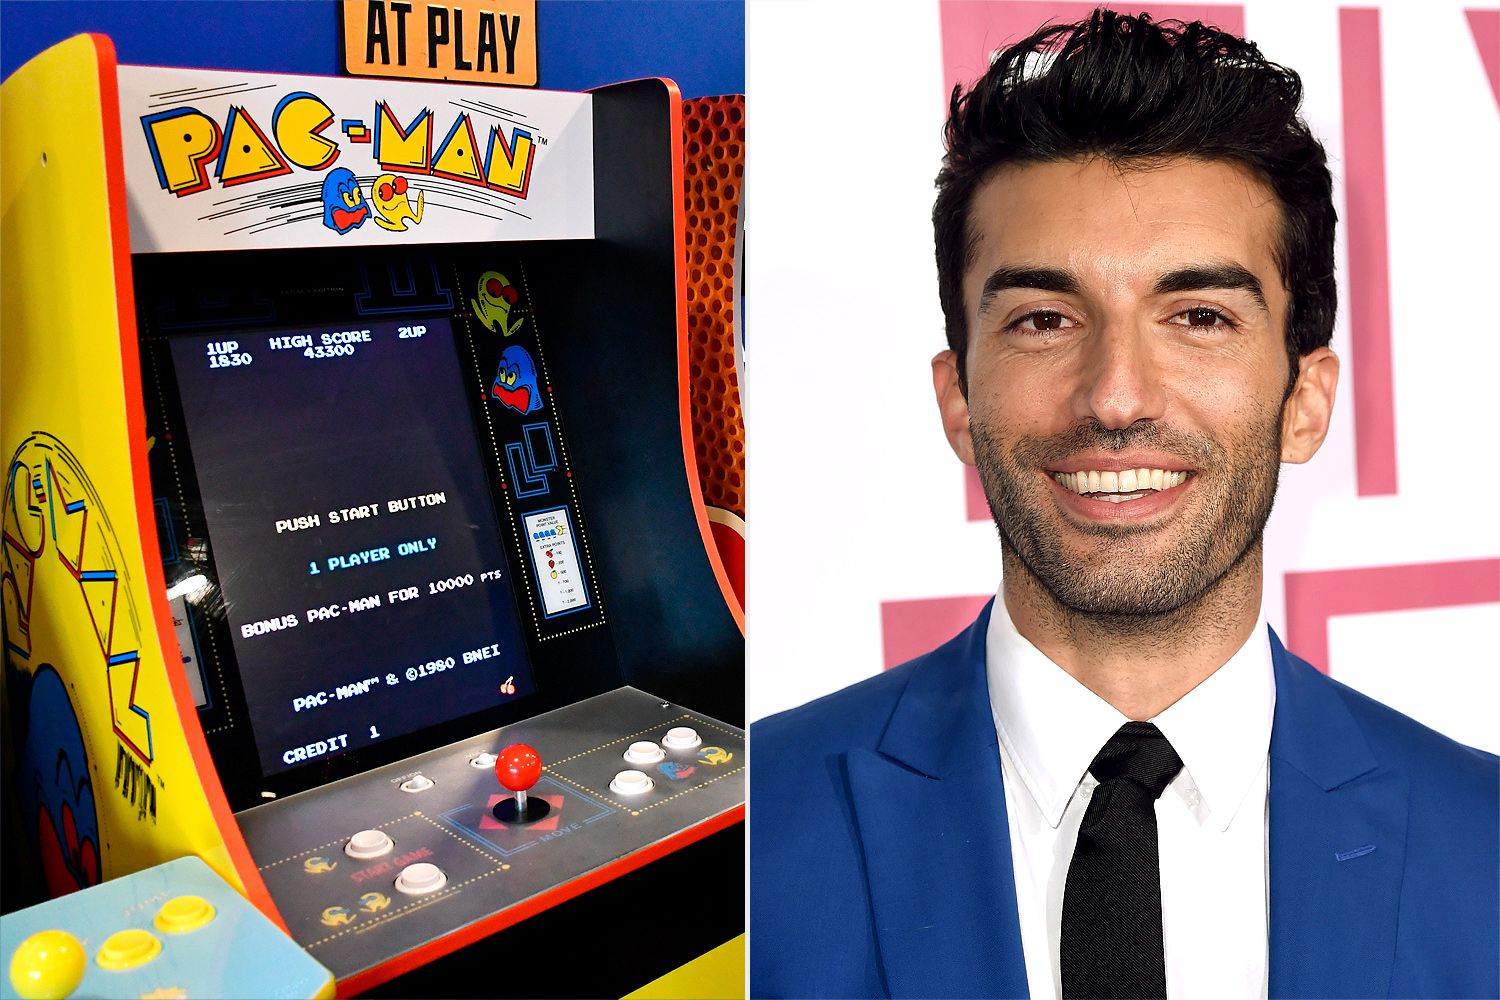 Live-Action Pac-Man Movie in the Works from Jane the Virgin Alum Justin Baldoni